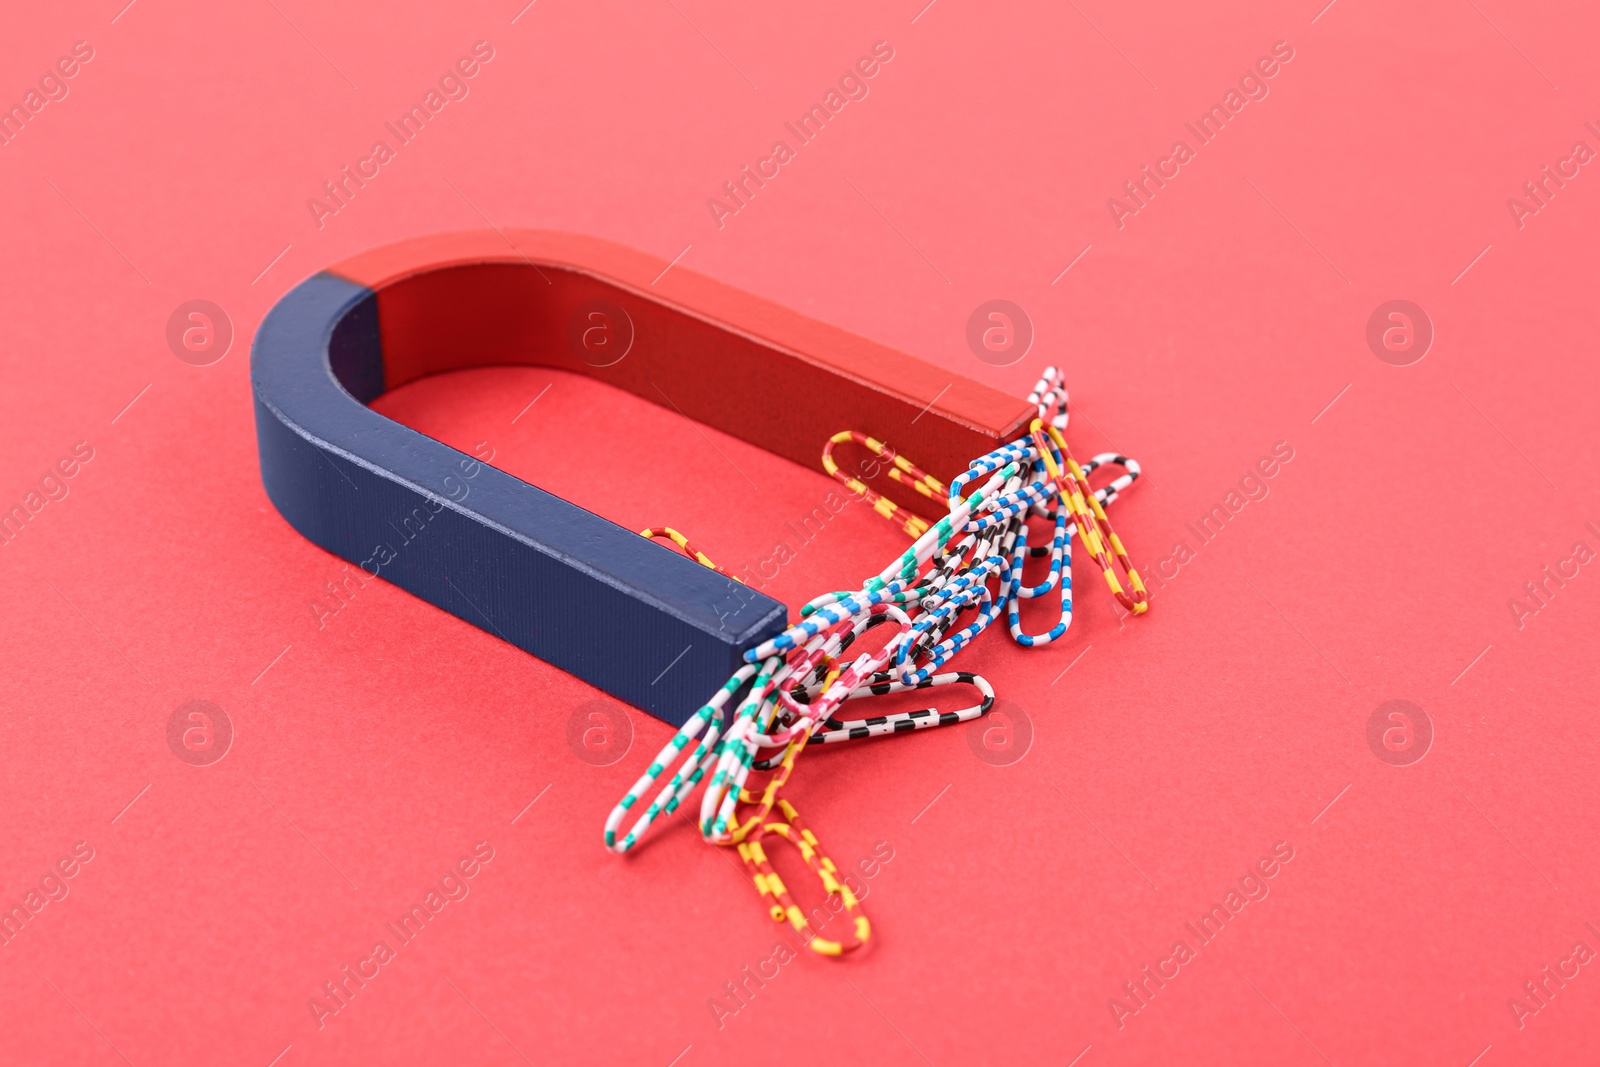 Photo of Magnet attracting paper clips on red background